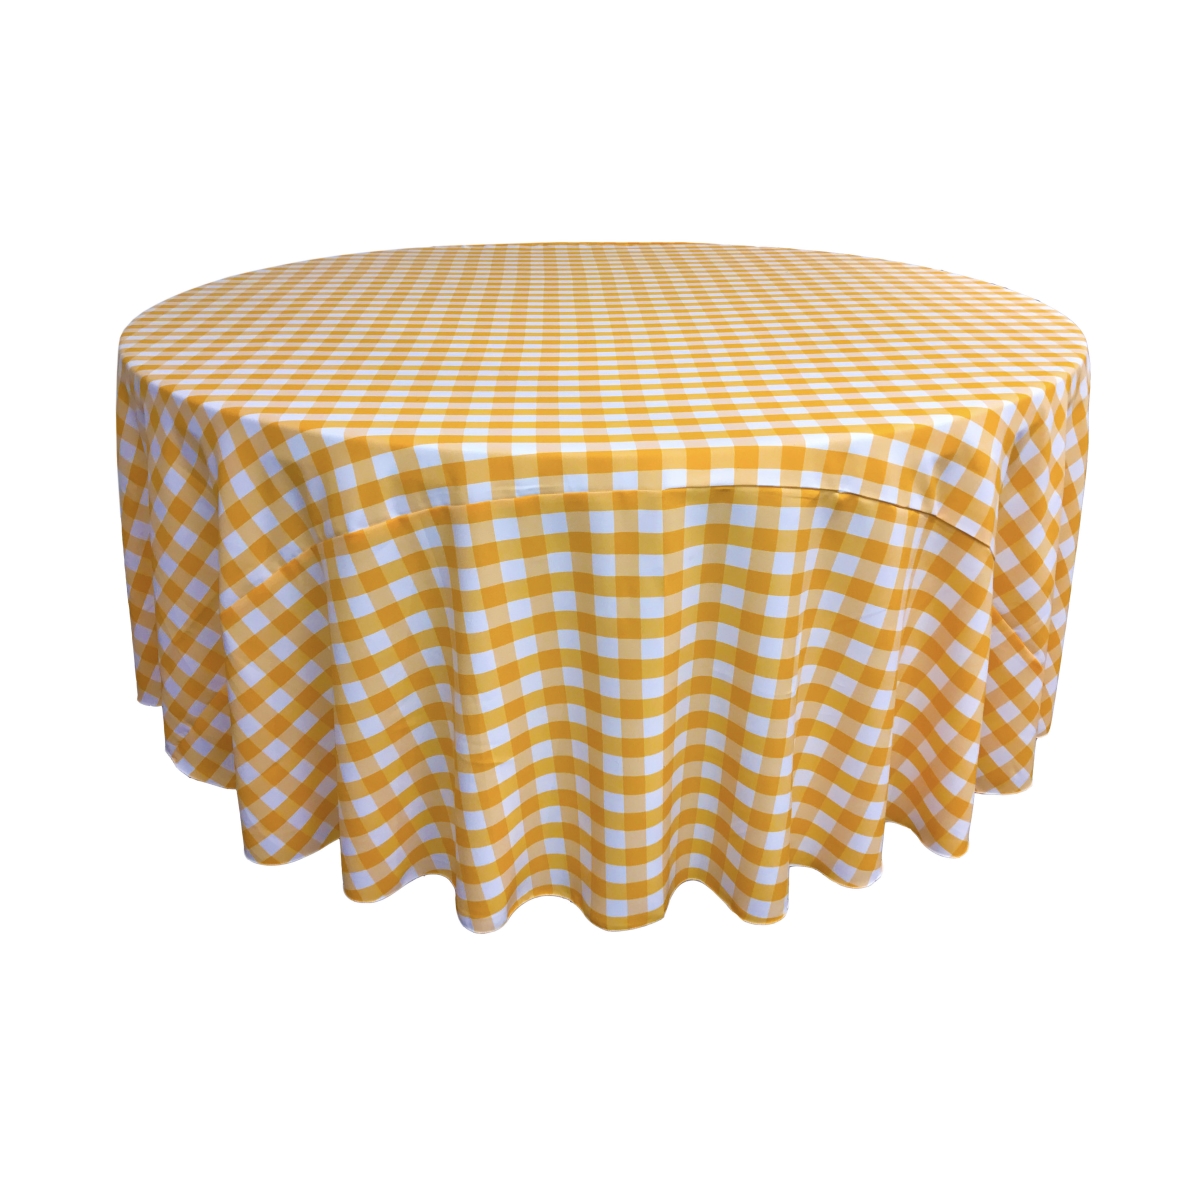 LA Linen TCcheck108R-DrkYellowK47 Polyester Gingham Checkered Tablecloth, White & Dark yellow - 108 in. Round